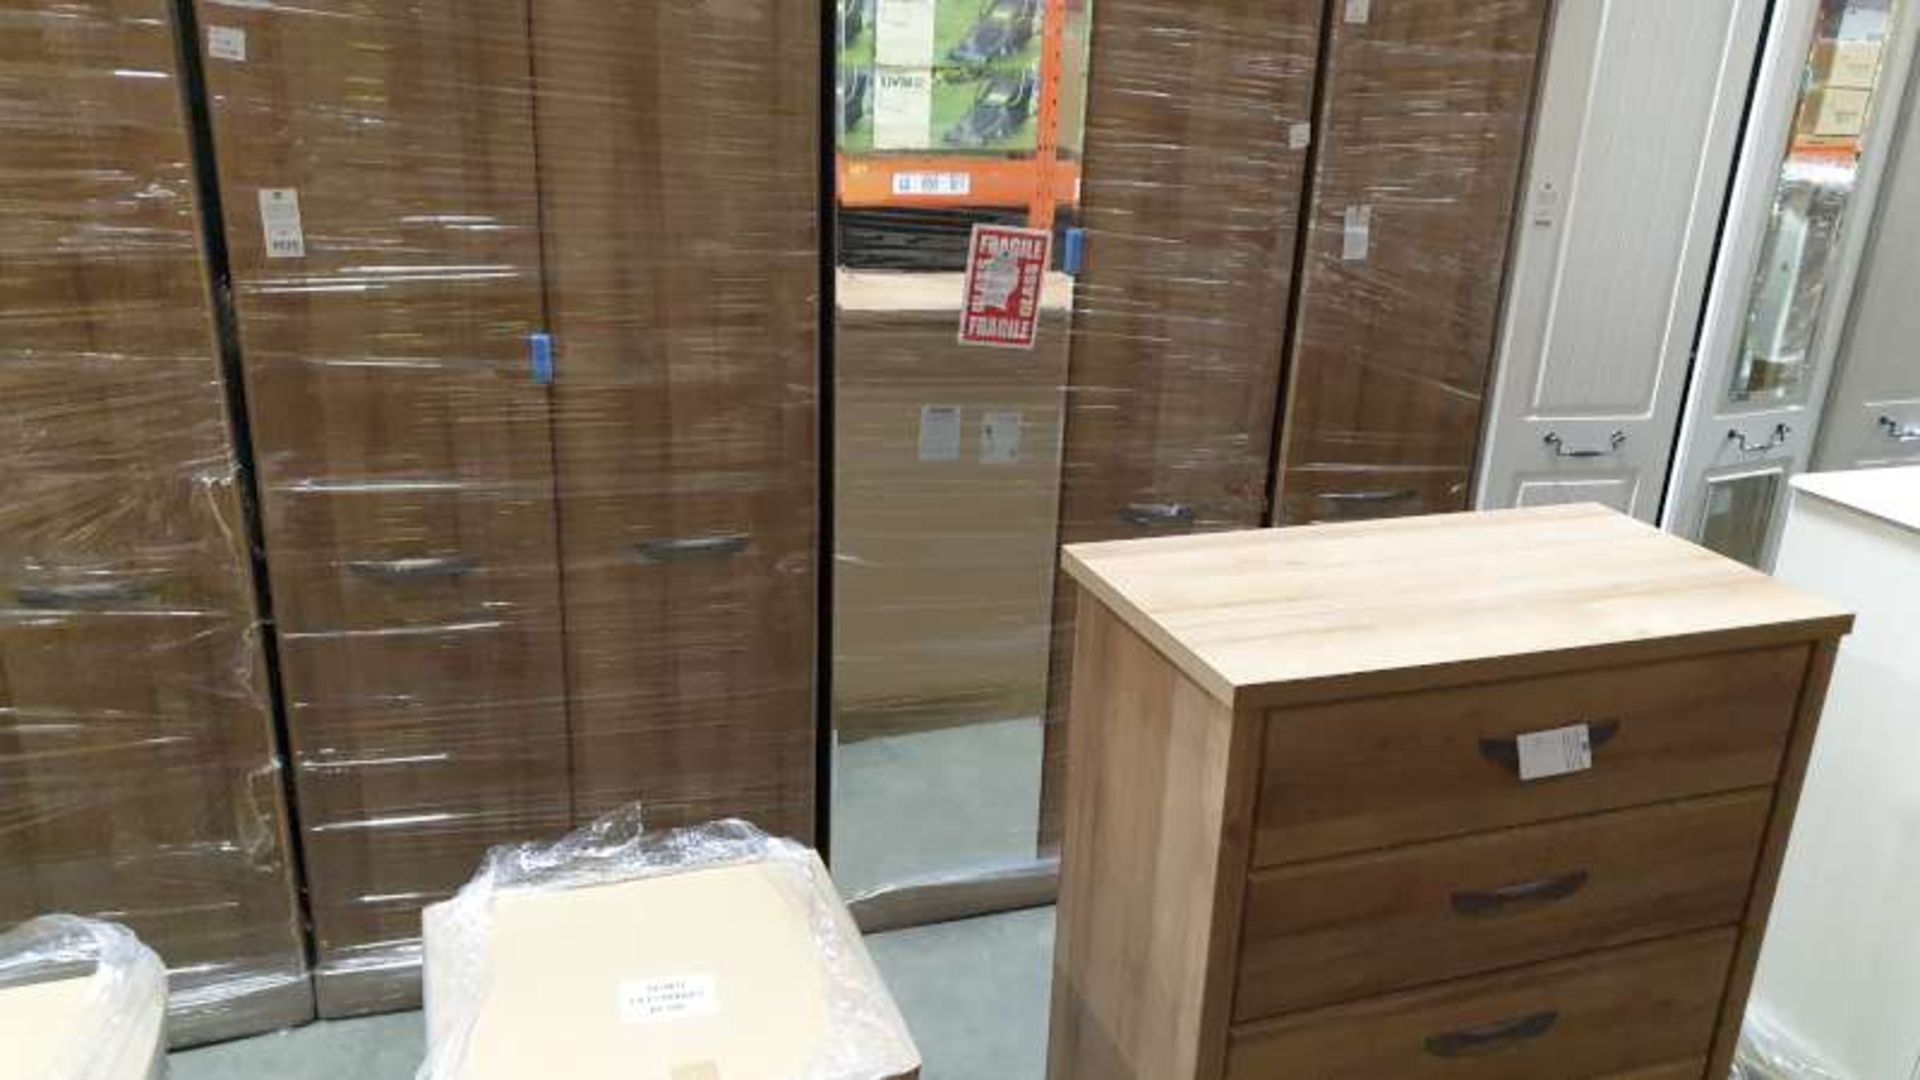 FURNITURE LOT CONTAINING 2 X DOUBLE WARDROBES, 1 X SINGLE WARDROBE, 1 X 3 DRAWER CHEST AND 1 X 5